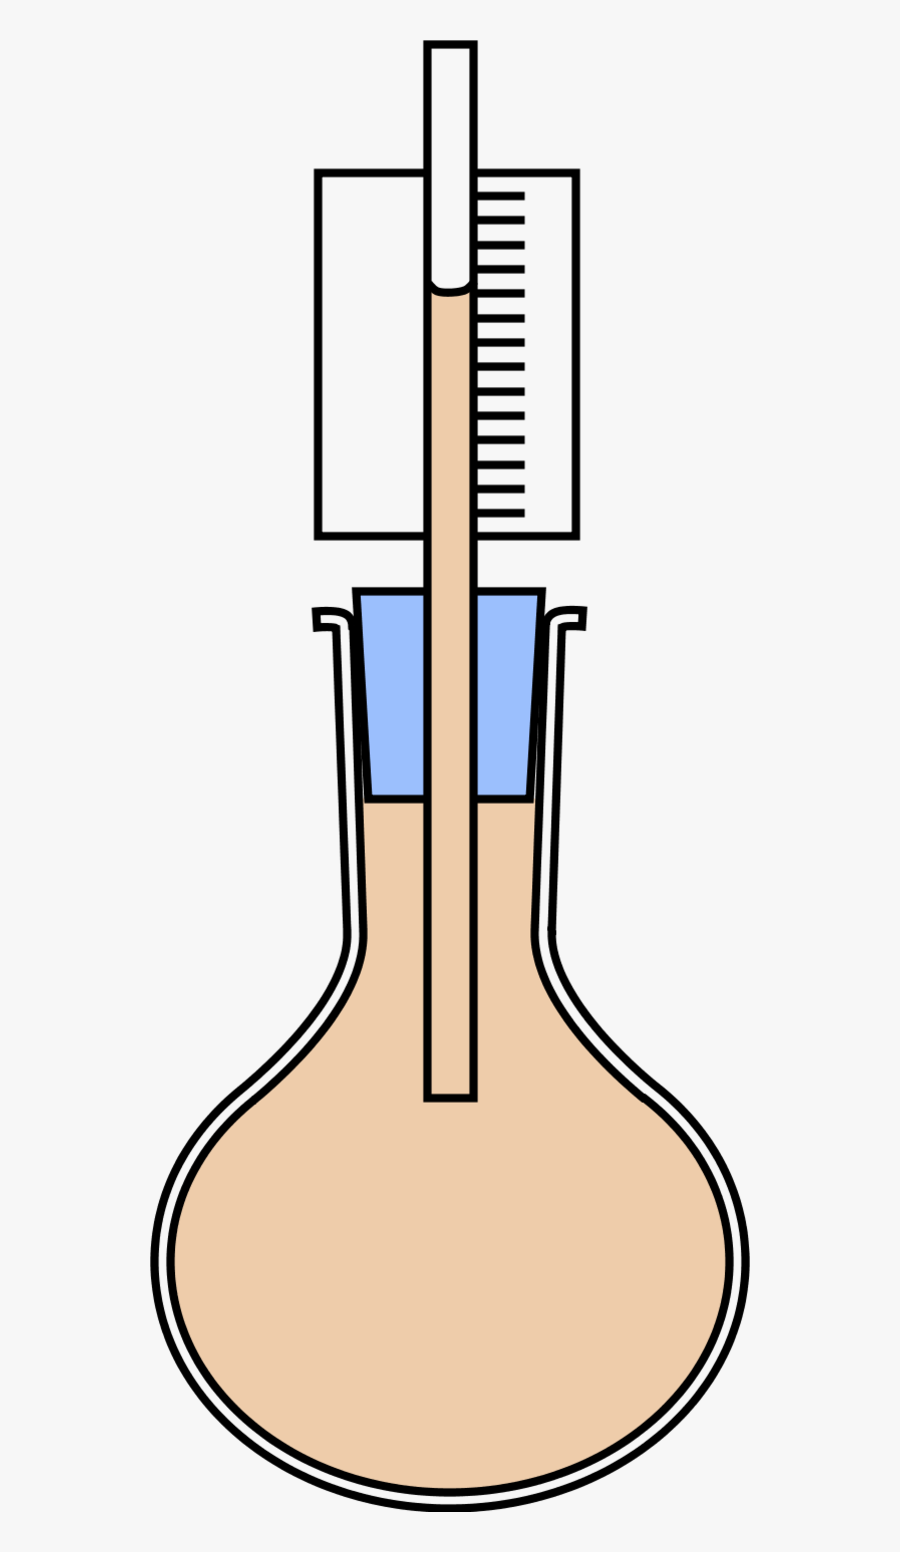 Laboratory Flasks Erlenmeyer Flask Thermal Expansion - Expansion Of Liquid Experiment, Transparent Clipart